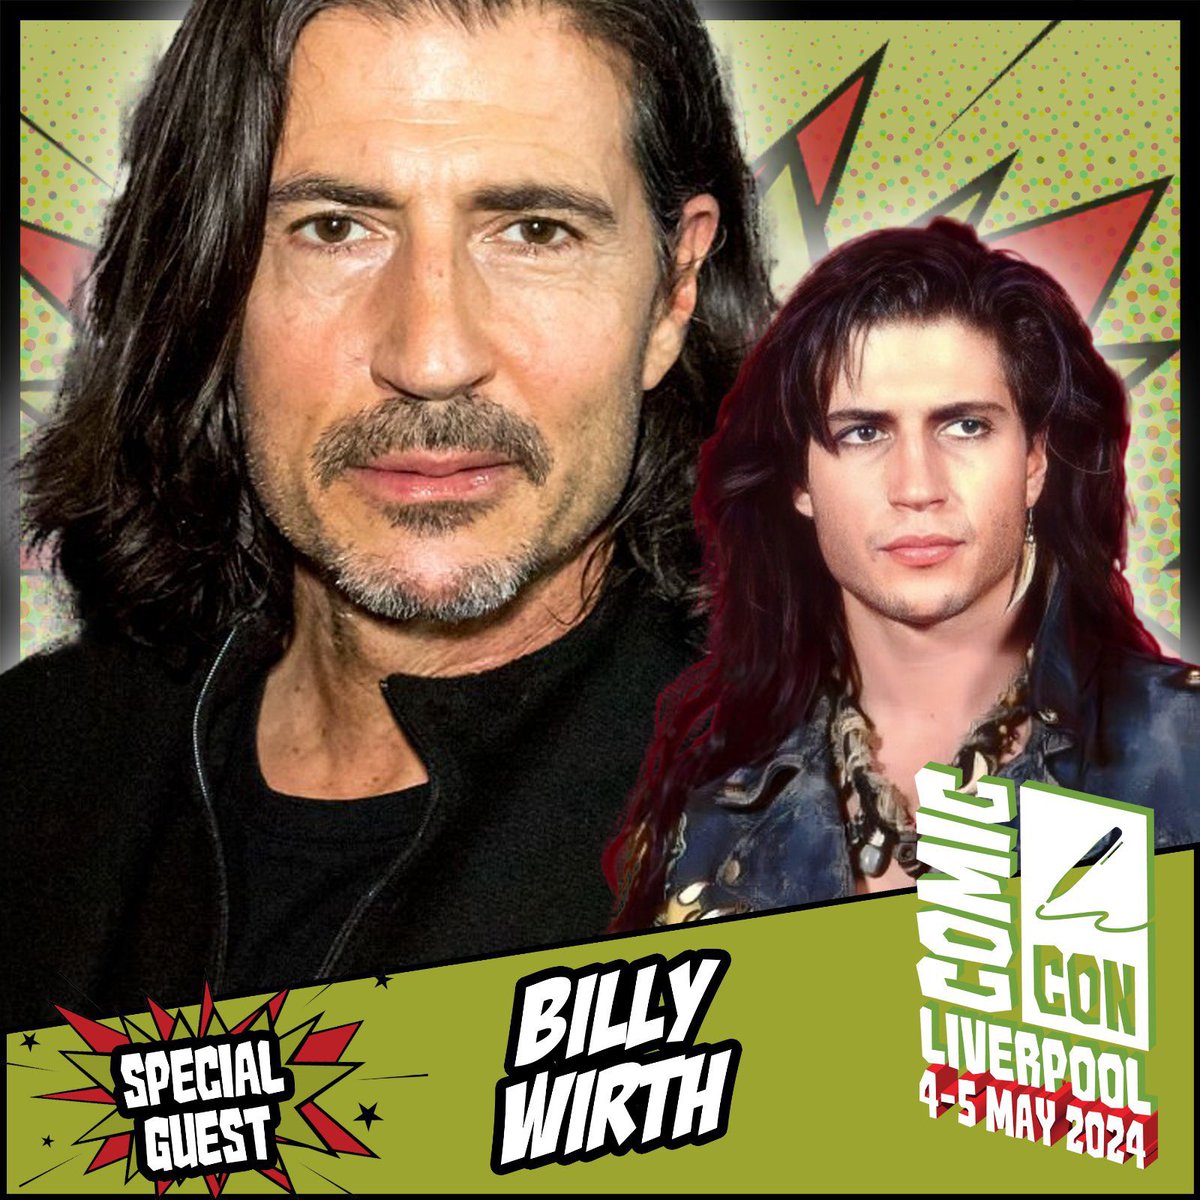 Comic Con Liverpool welcomes Billy Wirth, known for projects such as The Lost Boys, Seven Mummies, Shutter the Doors and many more. Appearing 4-5 May! Tickets: comicconventionliverpool.co.uk